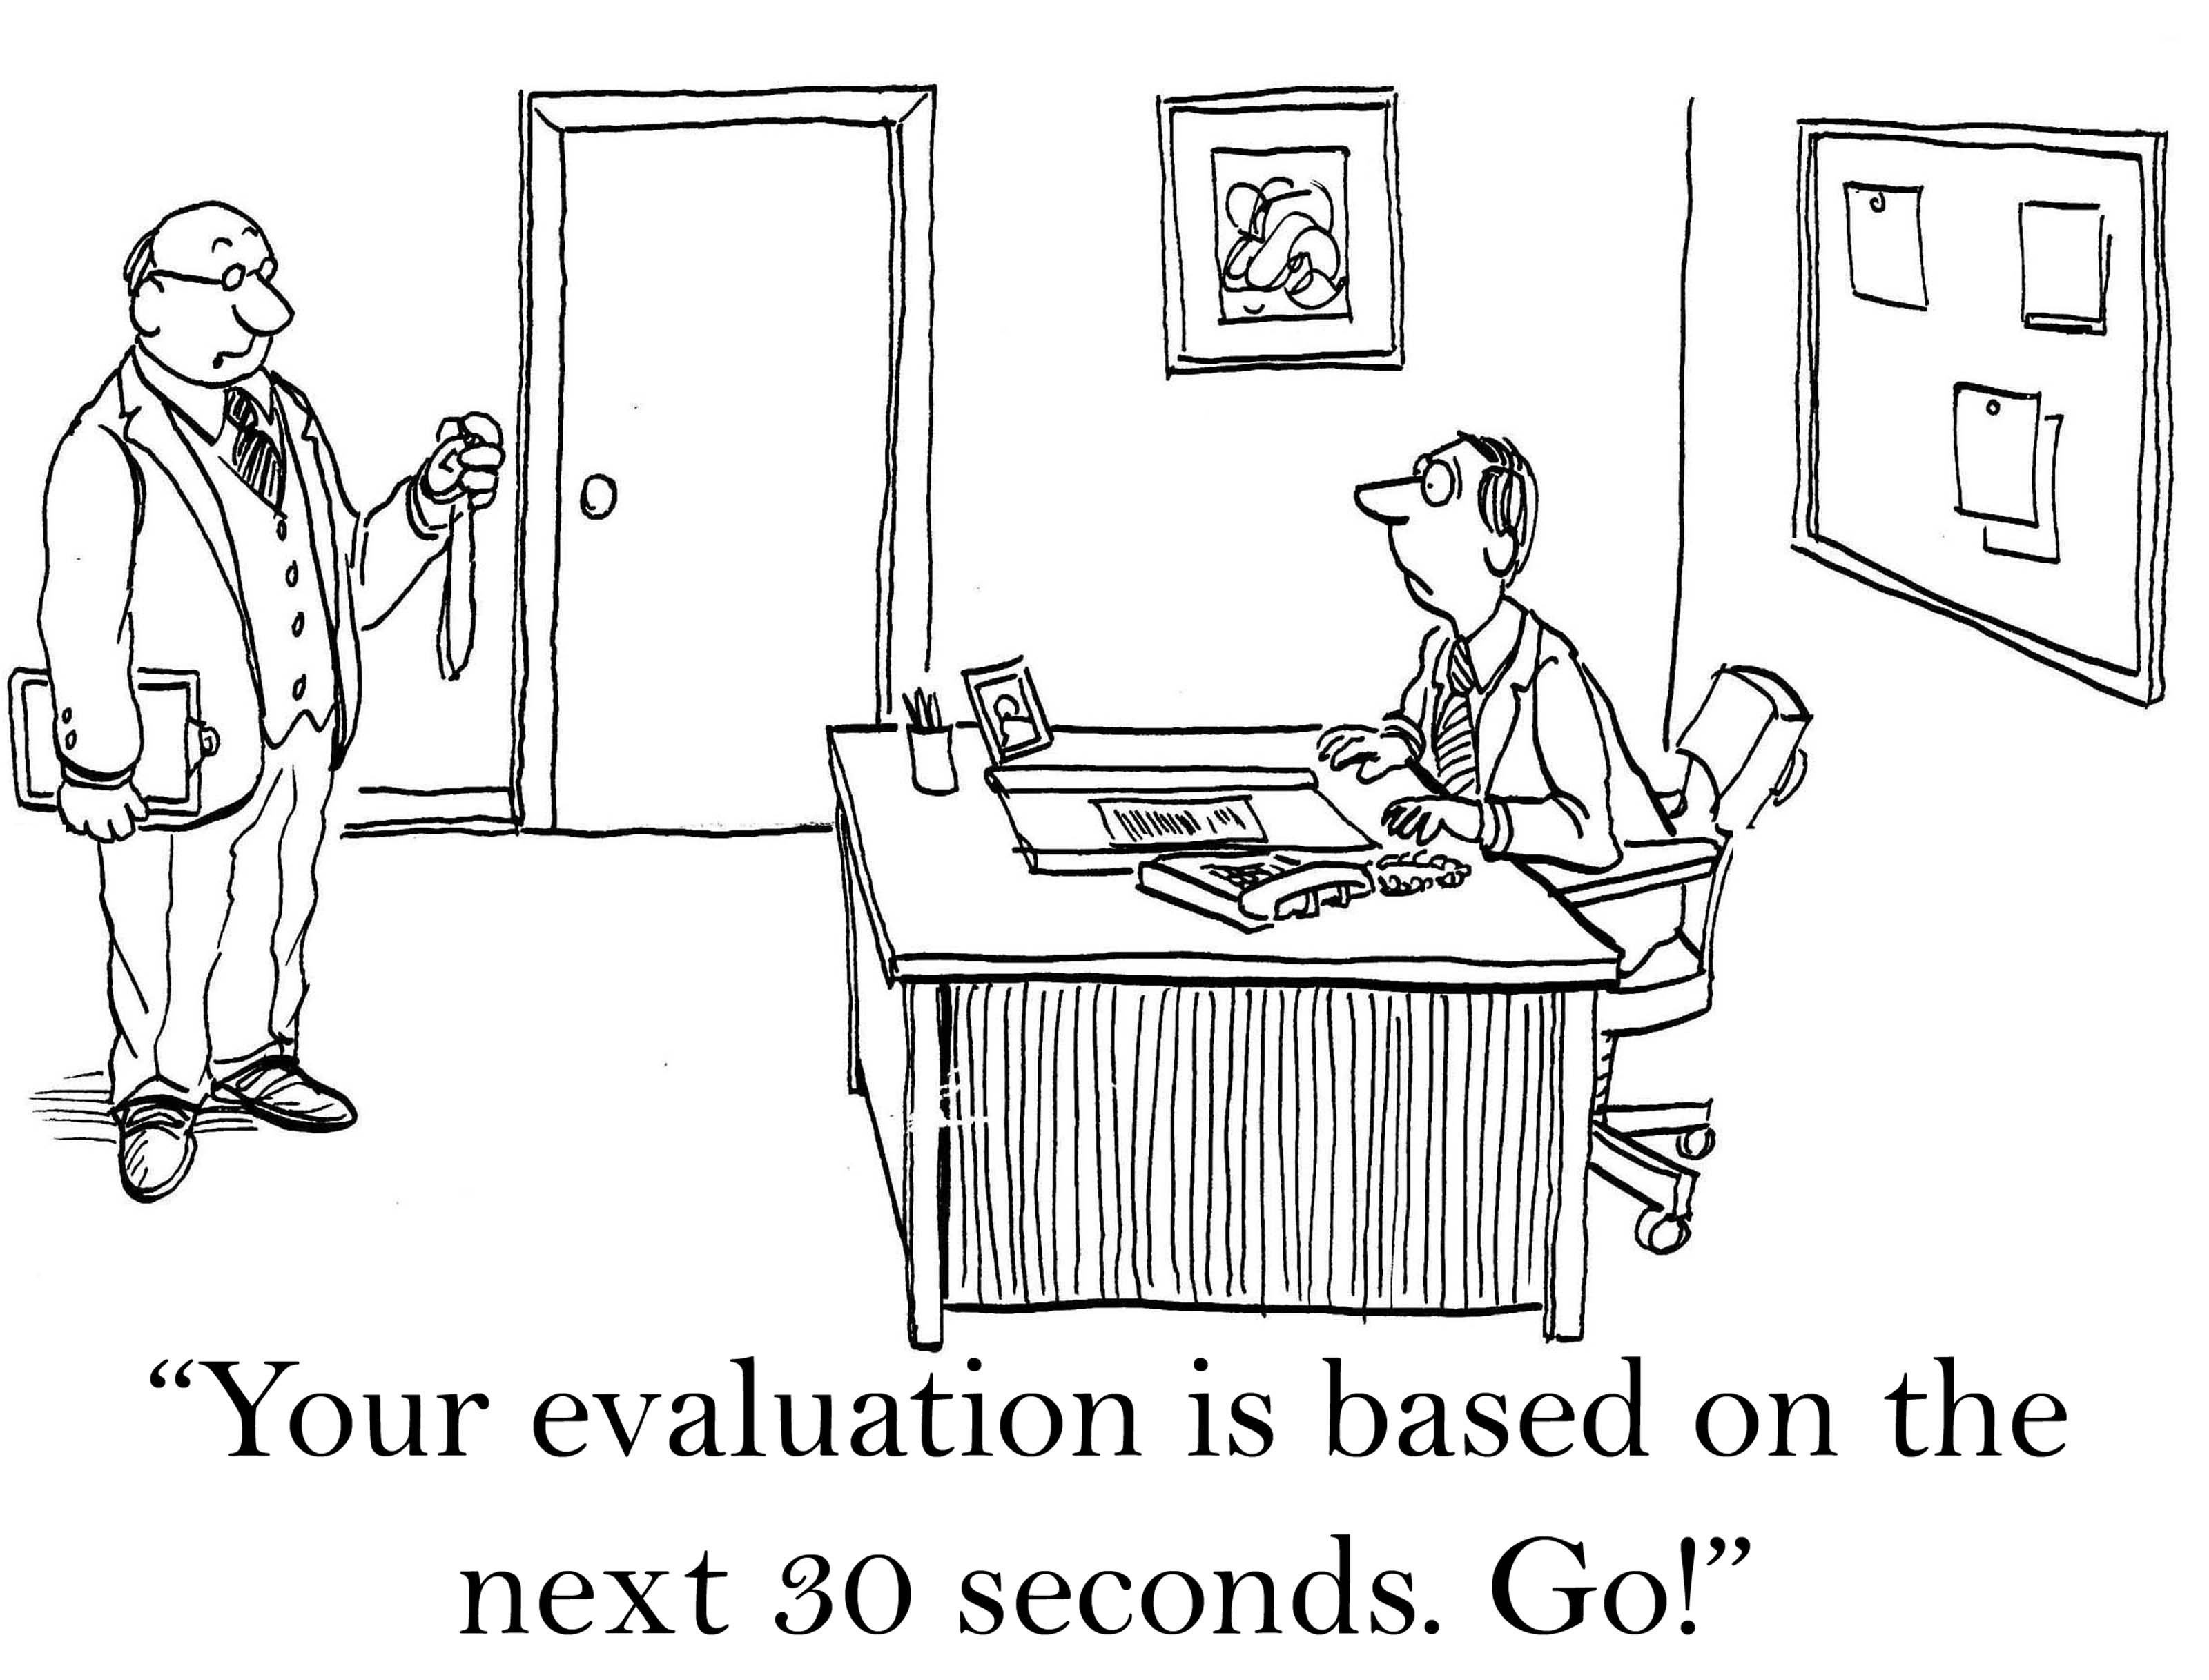 Evalutions based on 30 seconds